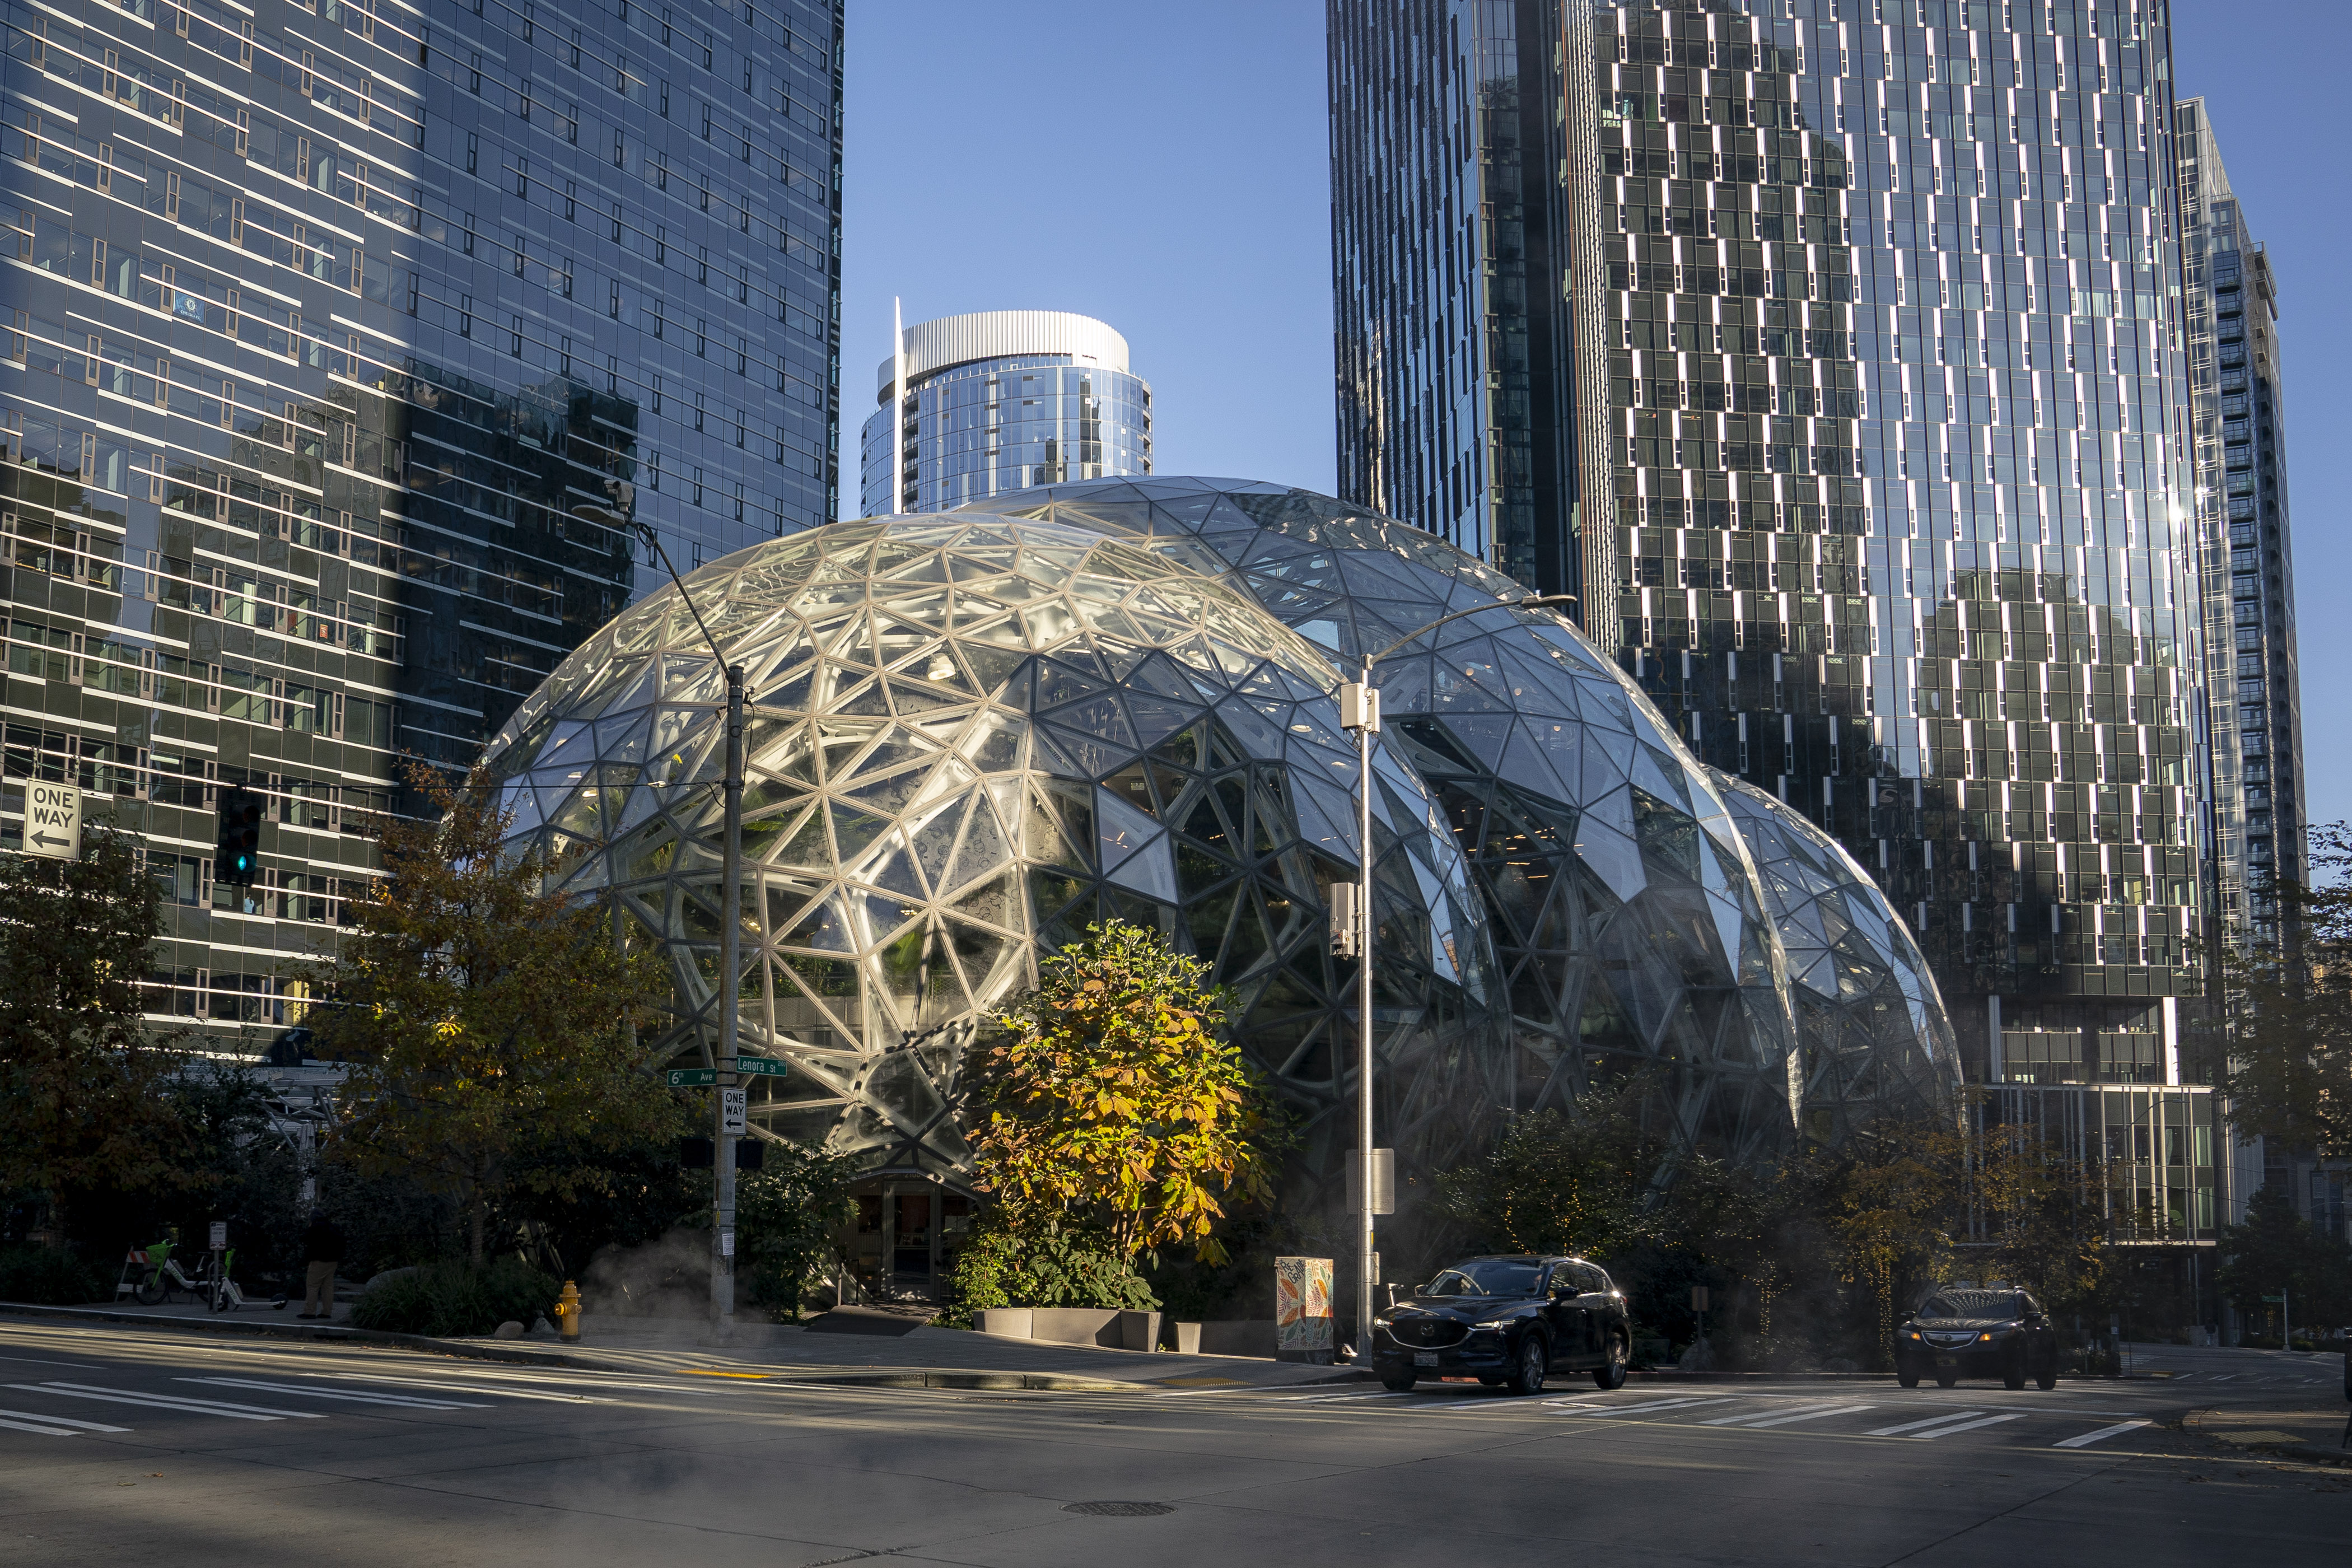 A photo of the Amazon Spheres alongside the company’s downtown headquarters in Seattle, Washington.